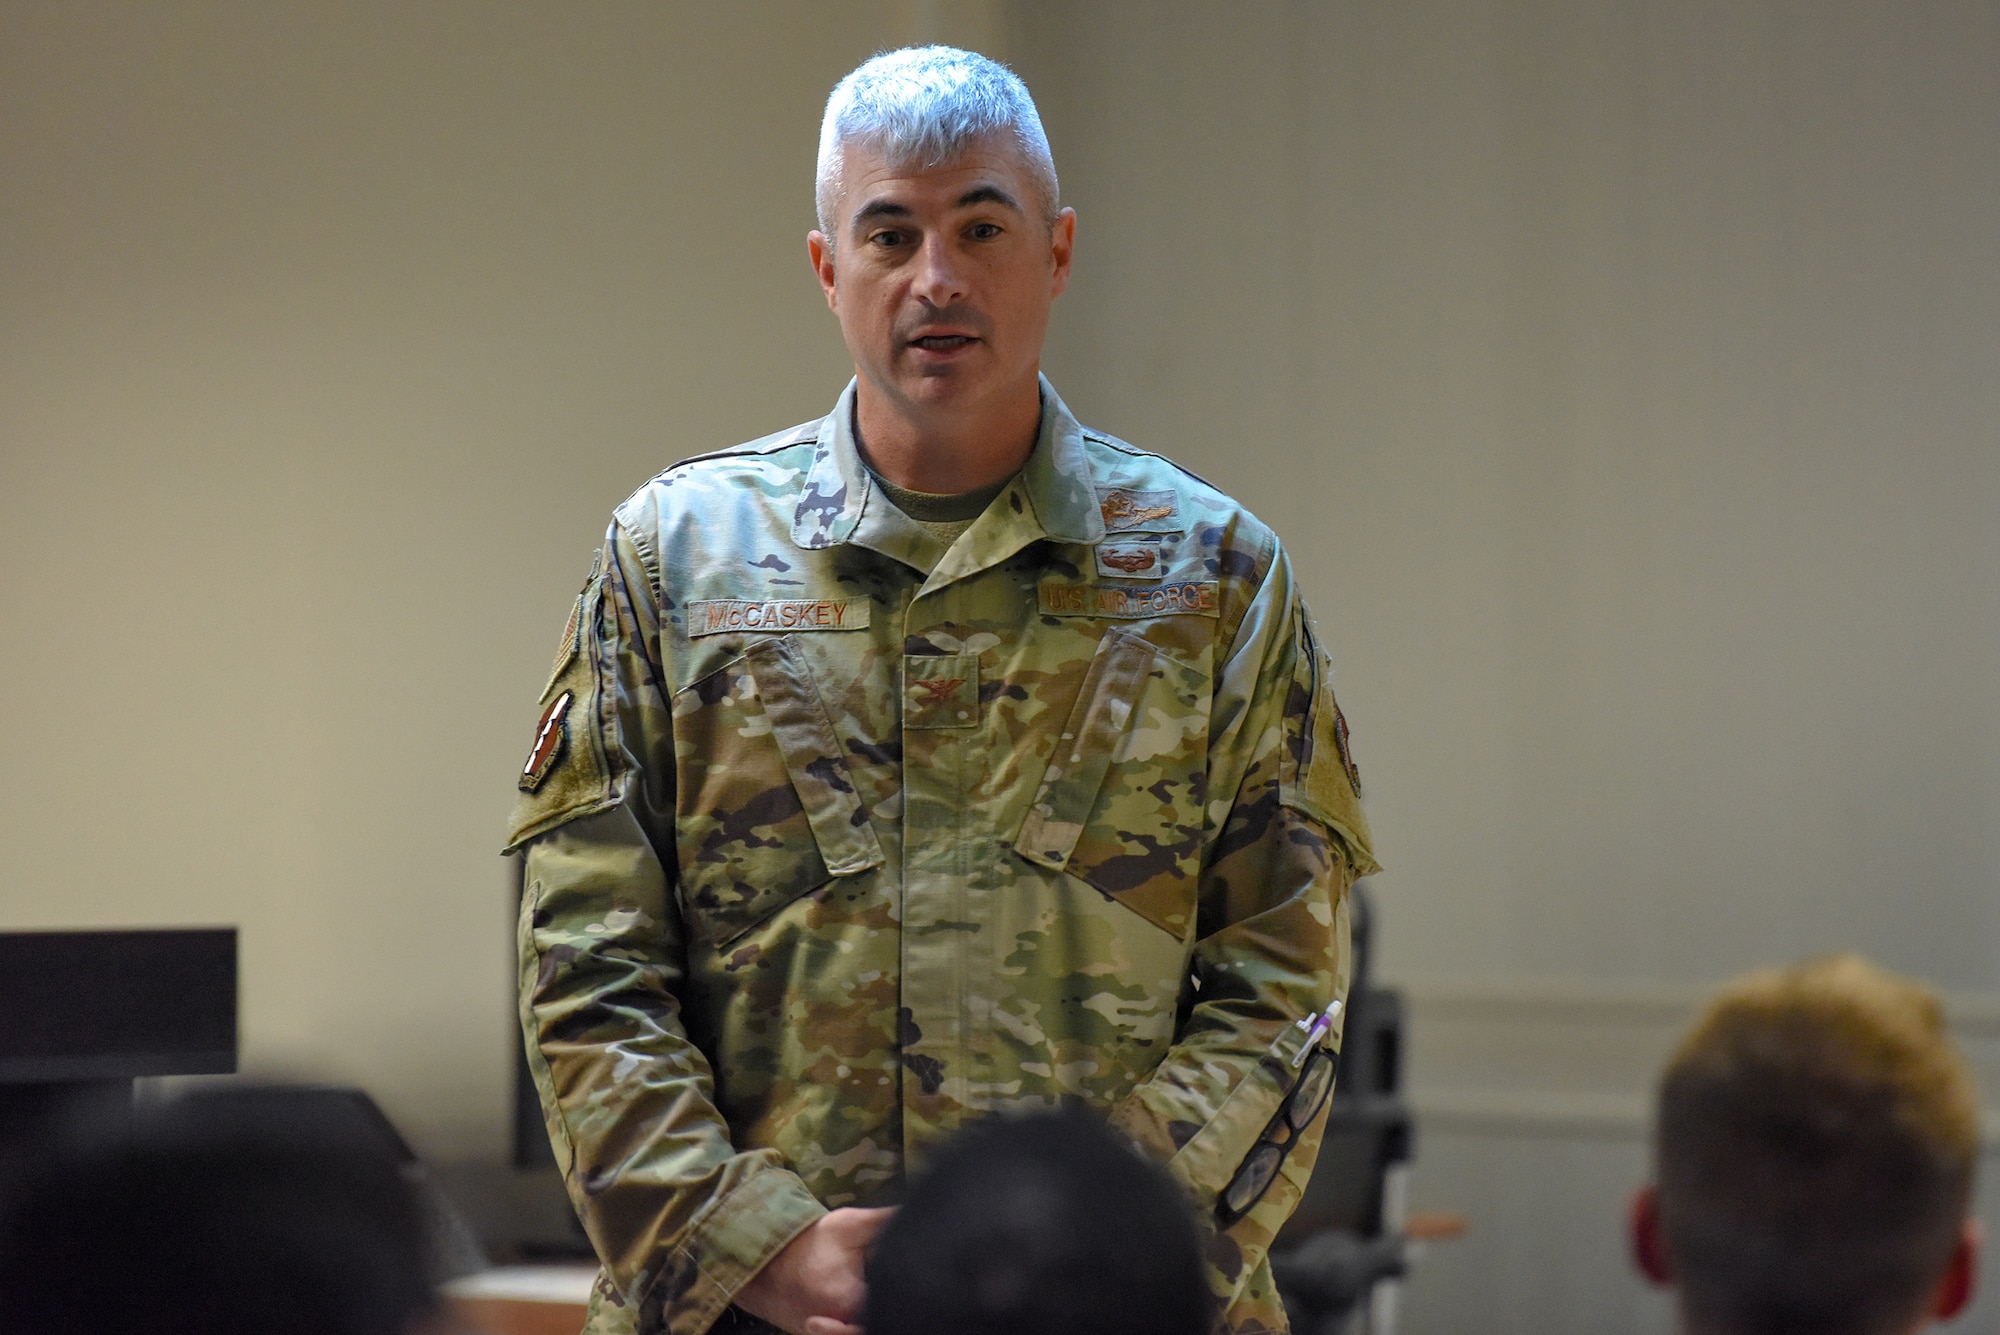 Col. Kevin McCaskey, 39th Air Base Wing (ABW) vice commander, gives a lecture to Airmen of the 39th ABW attending Airman Leadership School (ALS) Class 22-F at Incirlik Air Base, Turkey, Aug. 8, 2022.